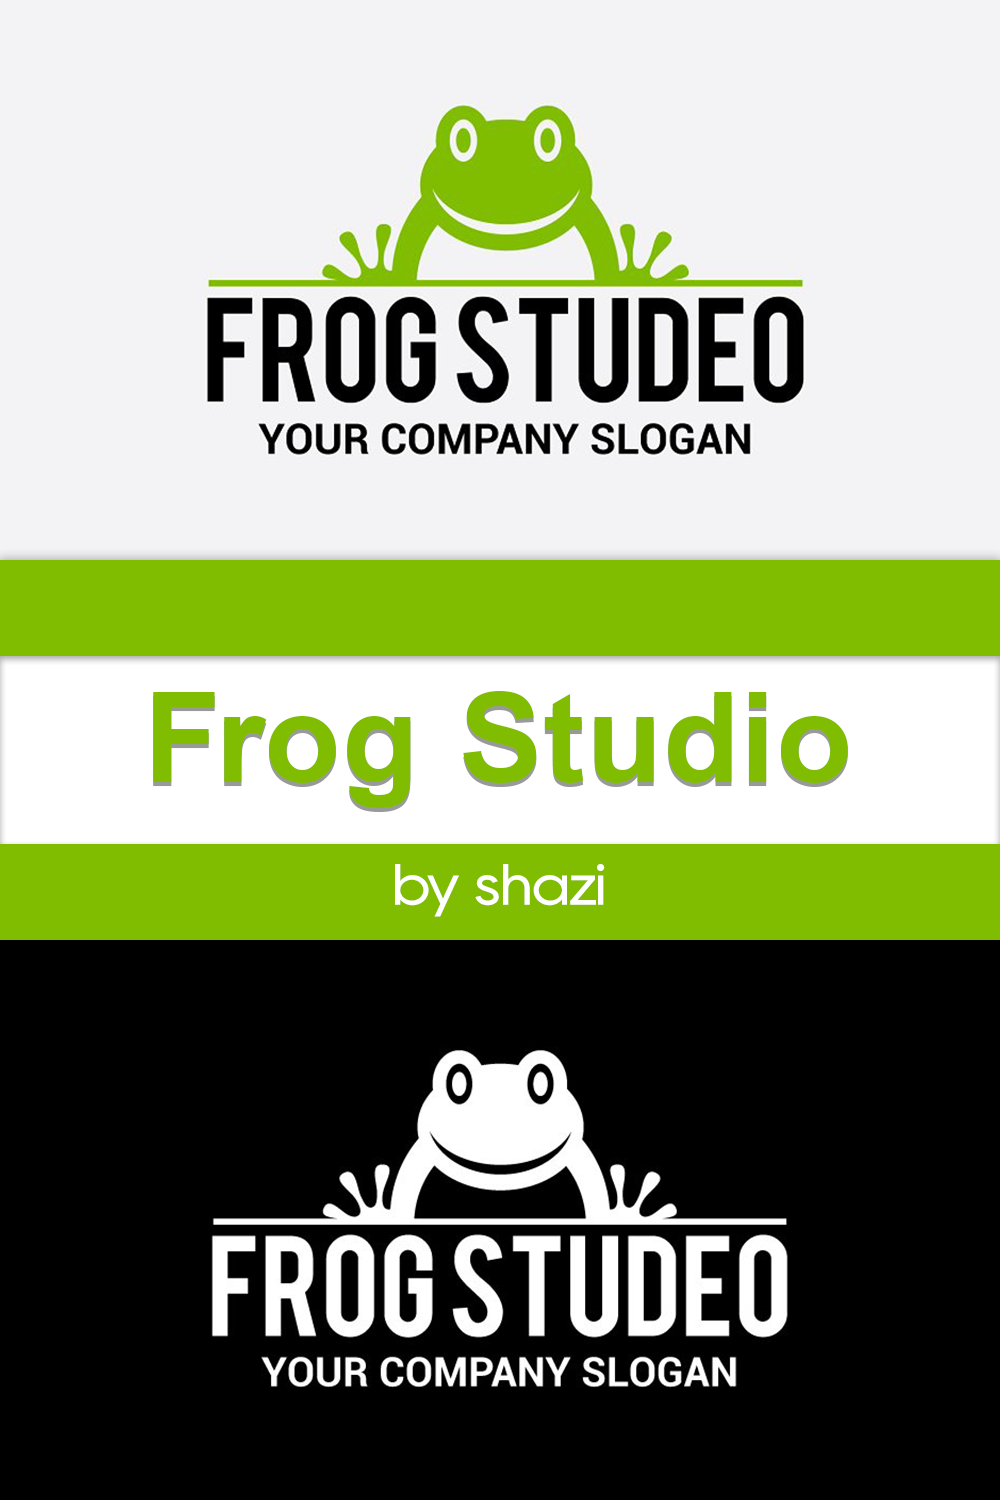 Some options of the frog logos.